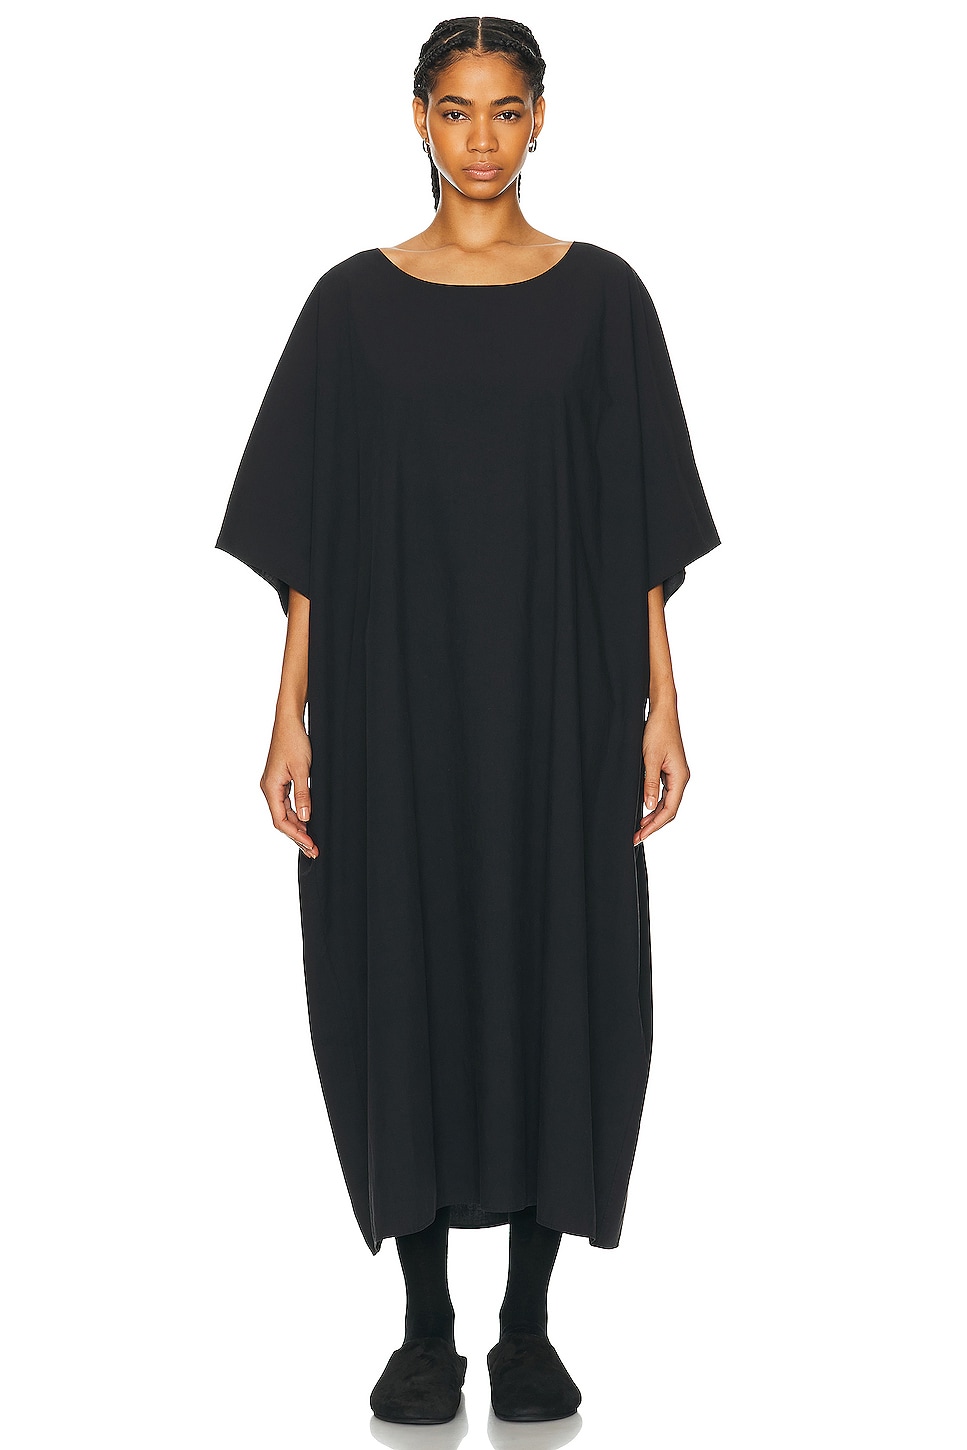 Image 1 of The Row Isora Dress in BLACK